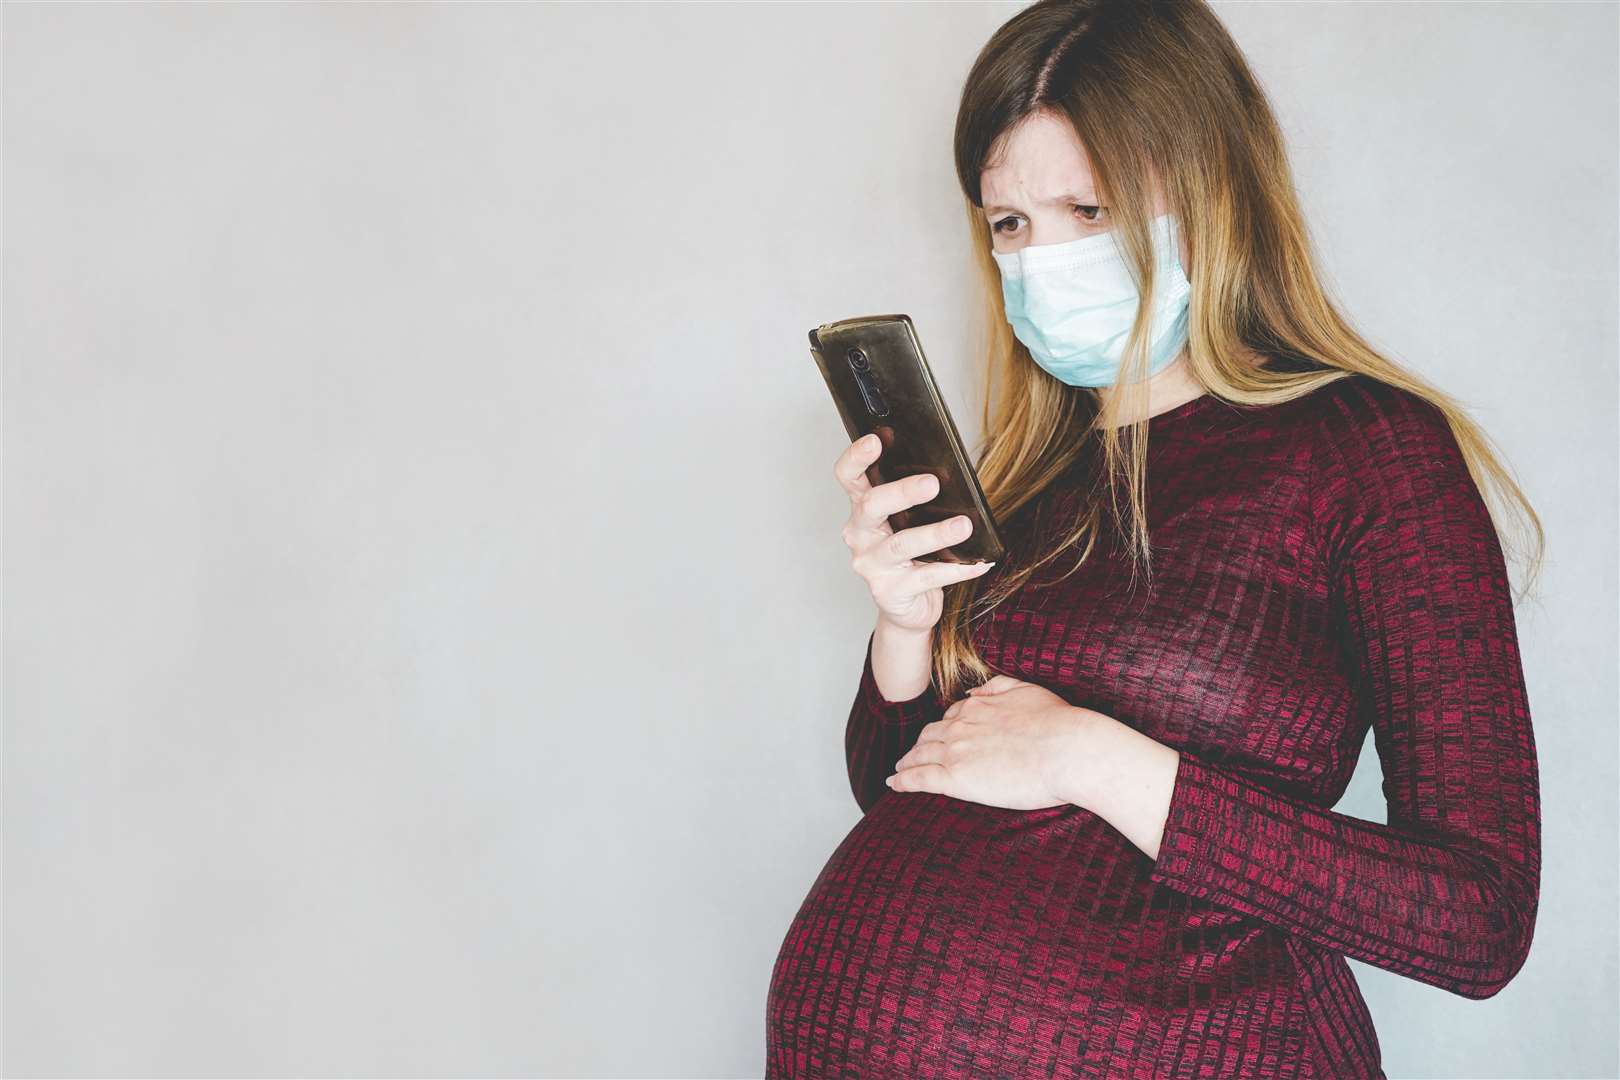 Procedures are in place to protect pregnant women during the coronavirus crisis.